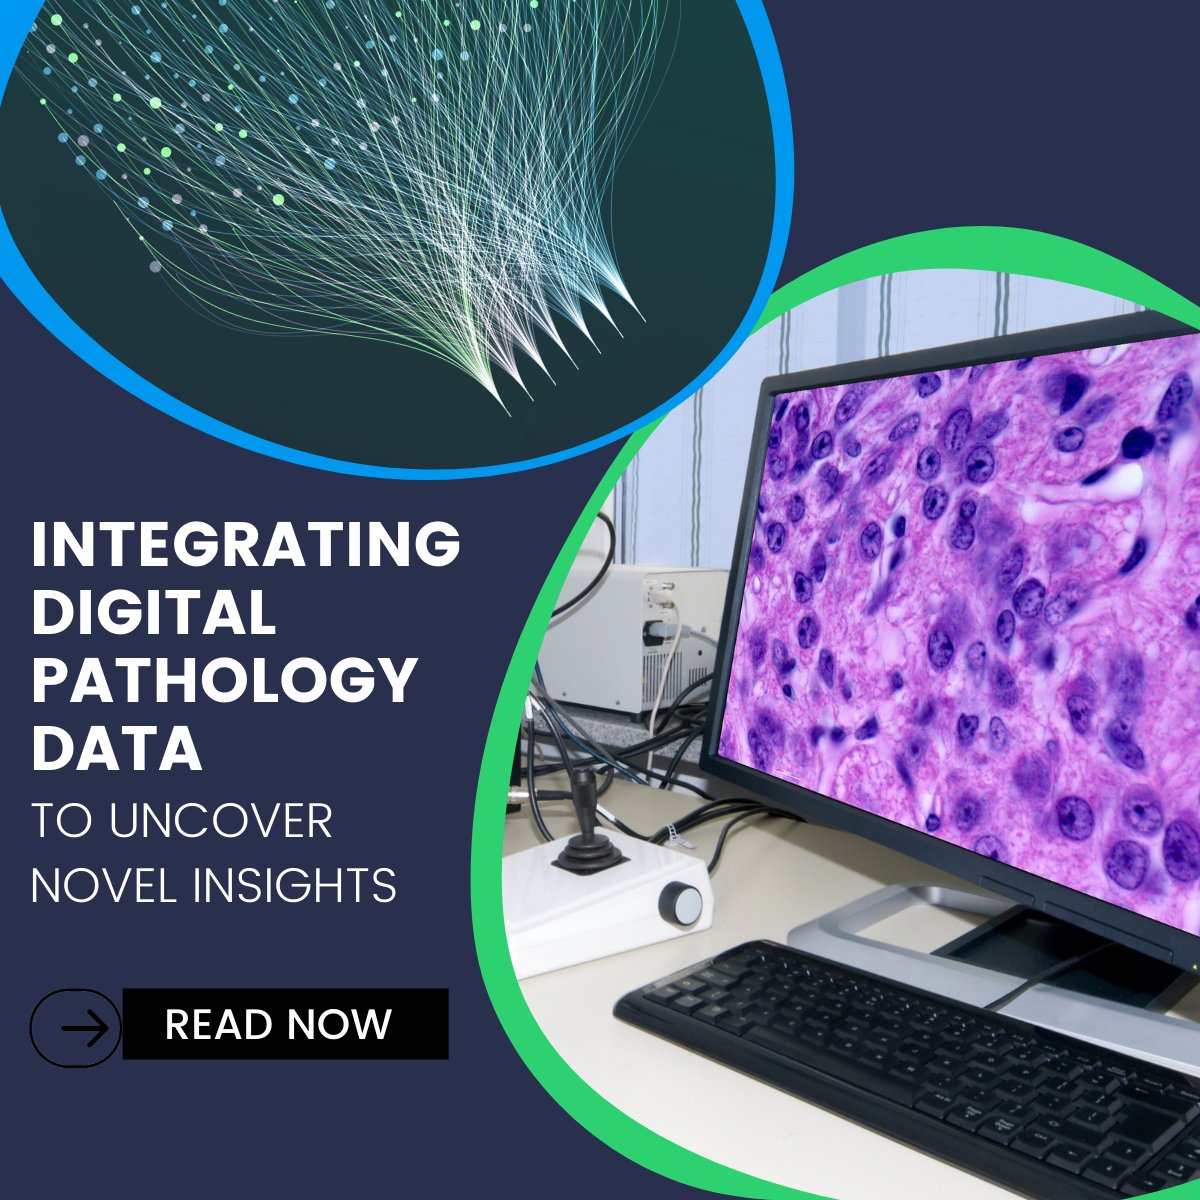 Sonrai's Dr Paul O'Reilly, Head of Innovation, examines the rewards that AI-enabled pathology brings in a research context, particularly in terms of automation, quantification and reproducibility of results. Read: bit.ly/3EfTRI2